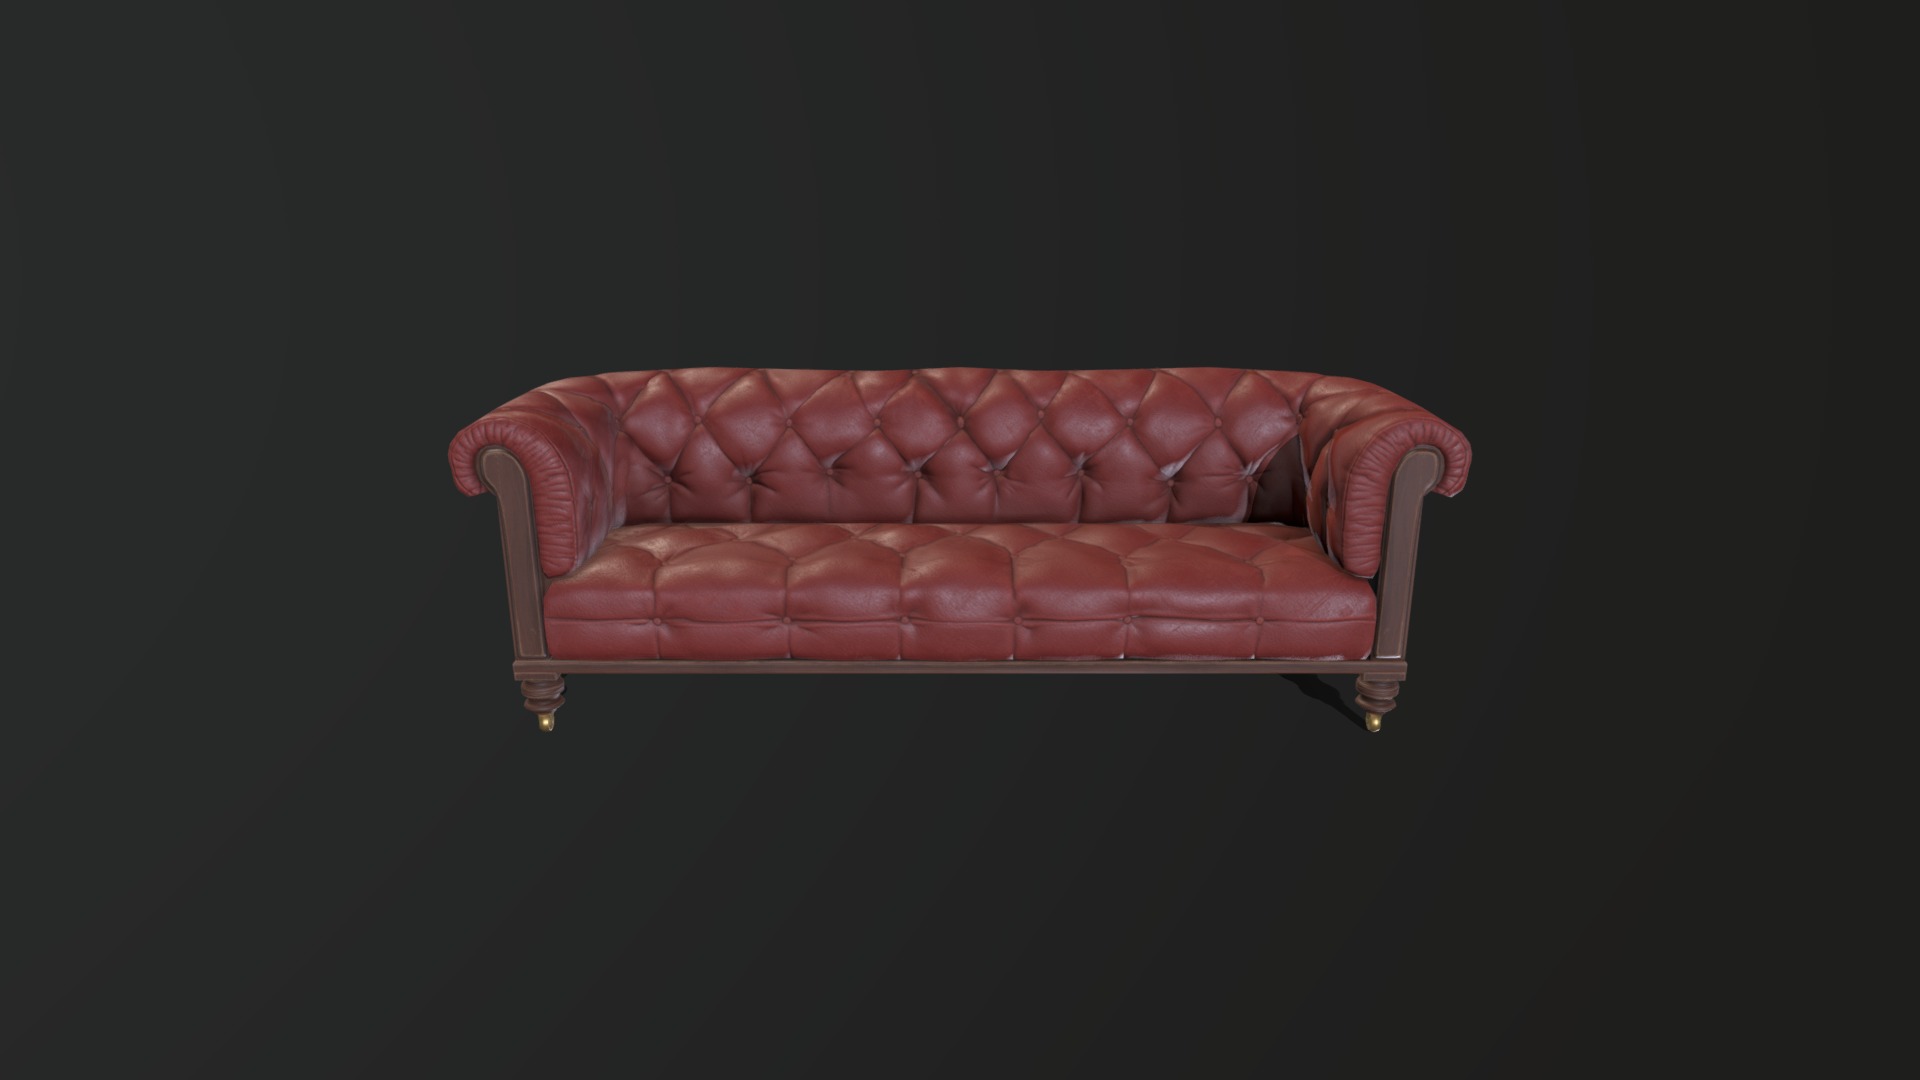 3D model Sofa game-res model - This is a 3D model of the Sofa game-res model. The 3D model is about a red couch with a black background.